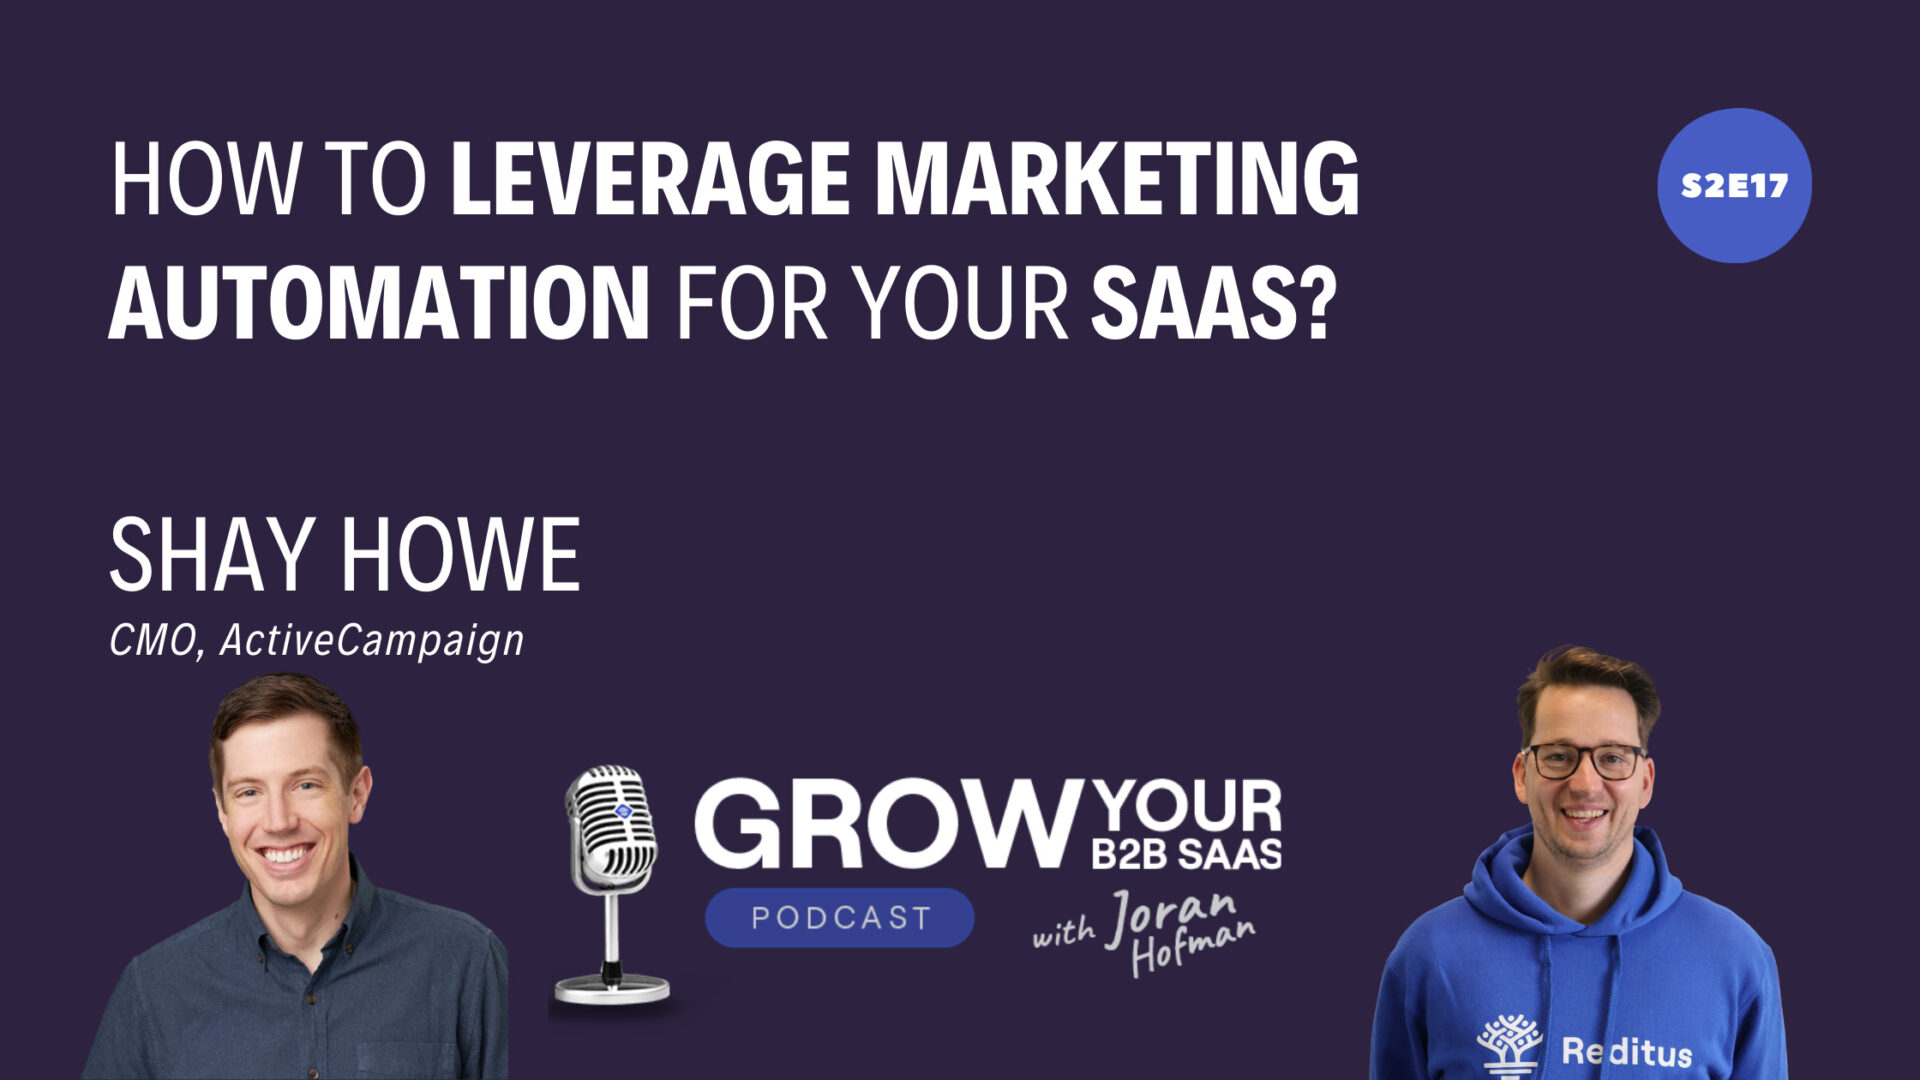 S2E17 – How to leverage Marketing Automation for your SaaS? With Shay Howe